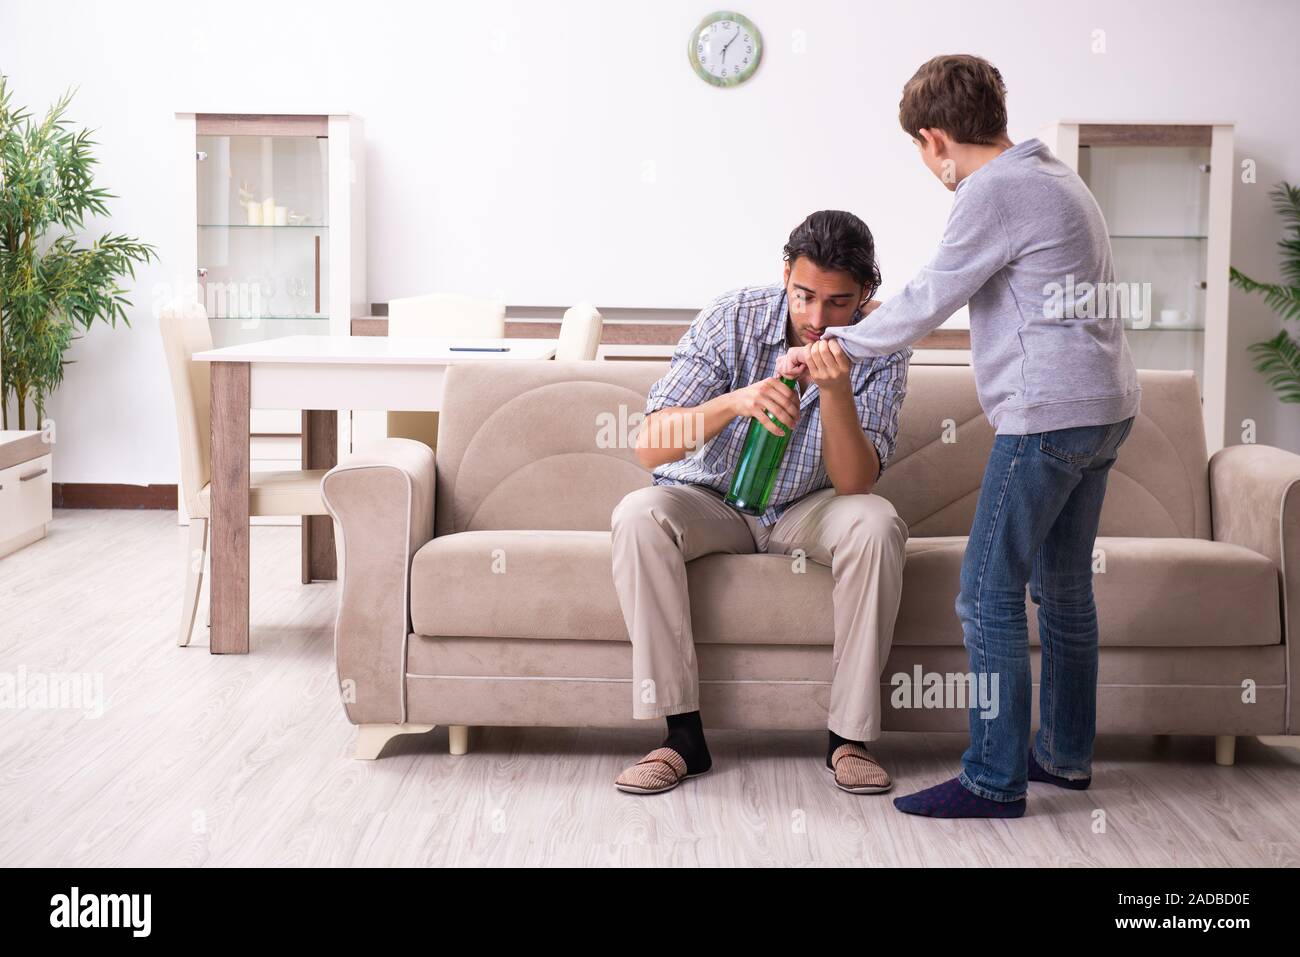 Drunk father and his son Stock Photo